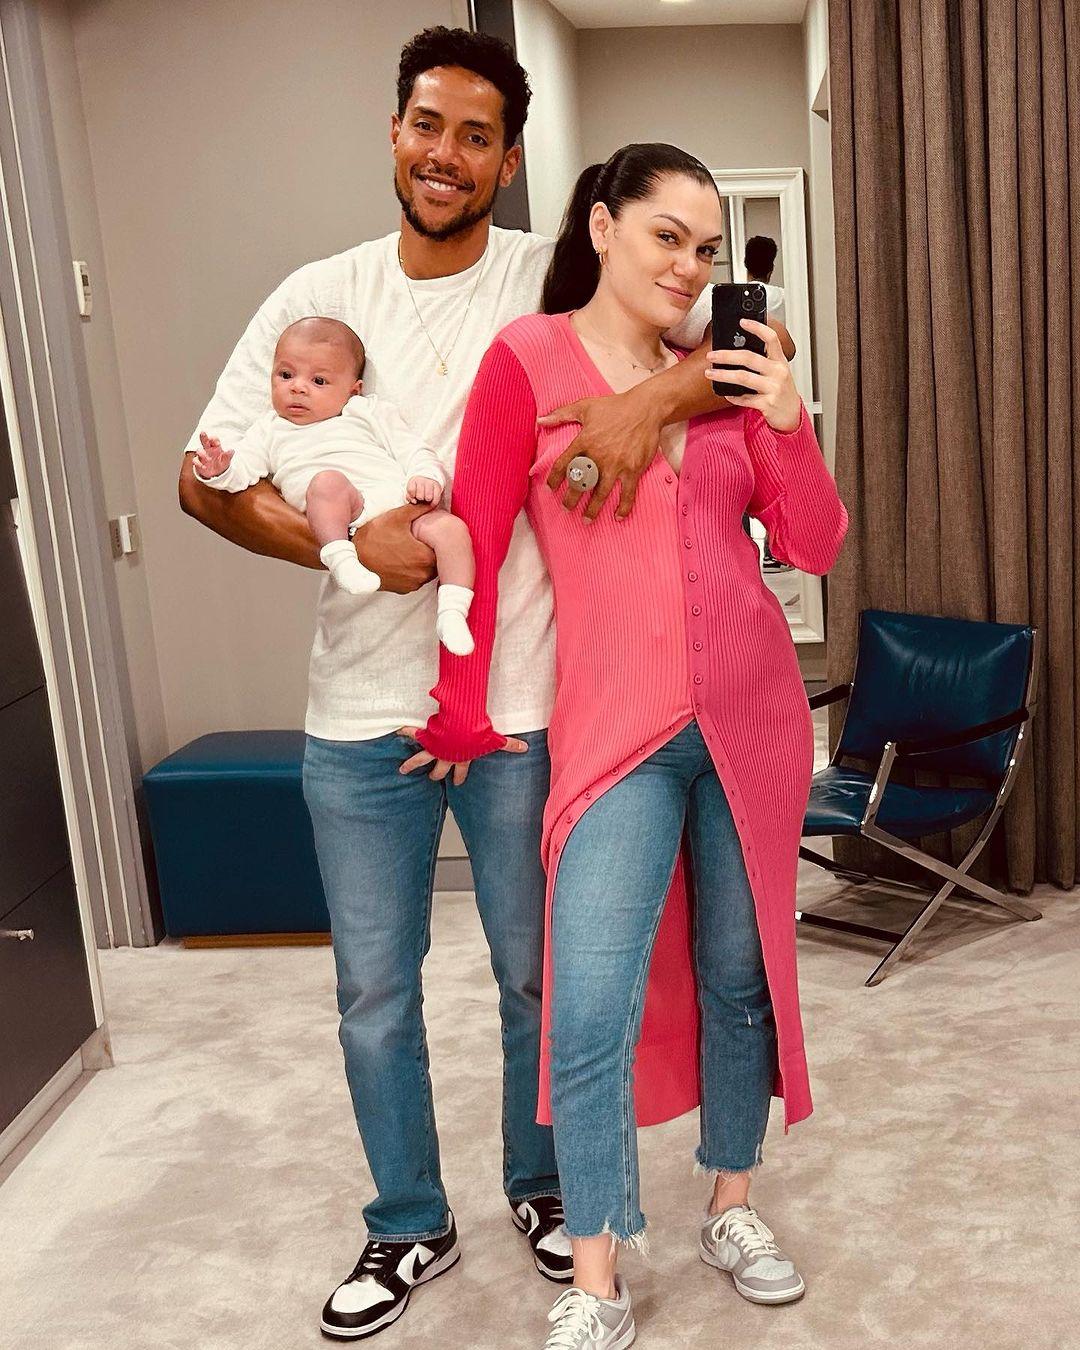 Jessie J flaunts her beautiful family with baby daddy and son